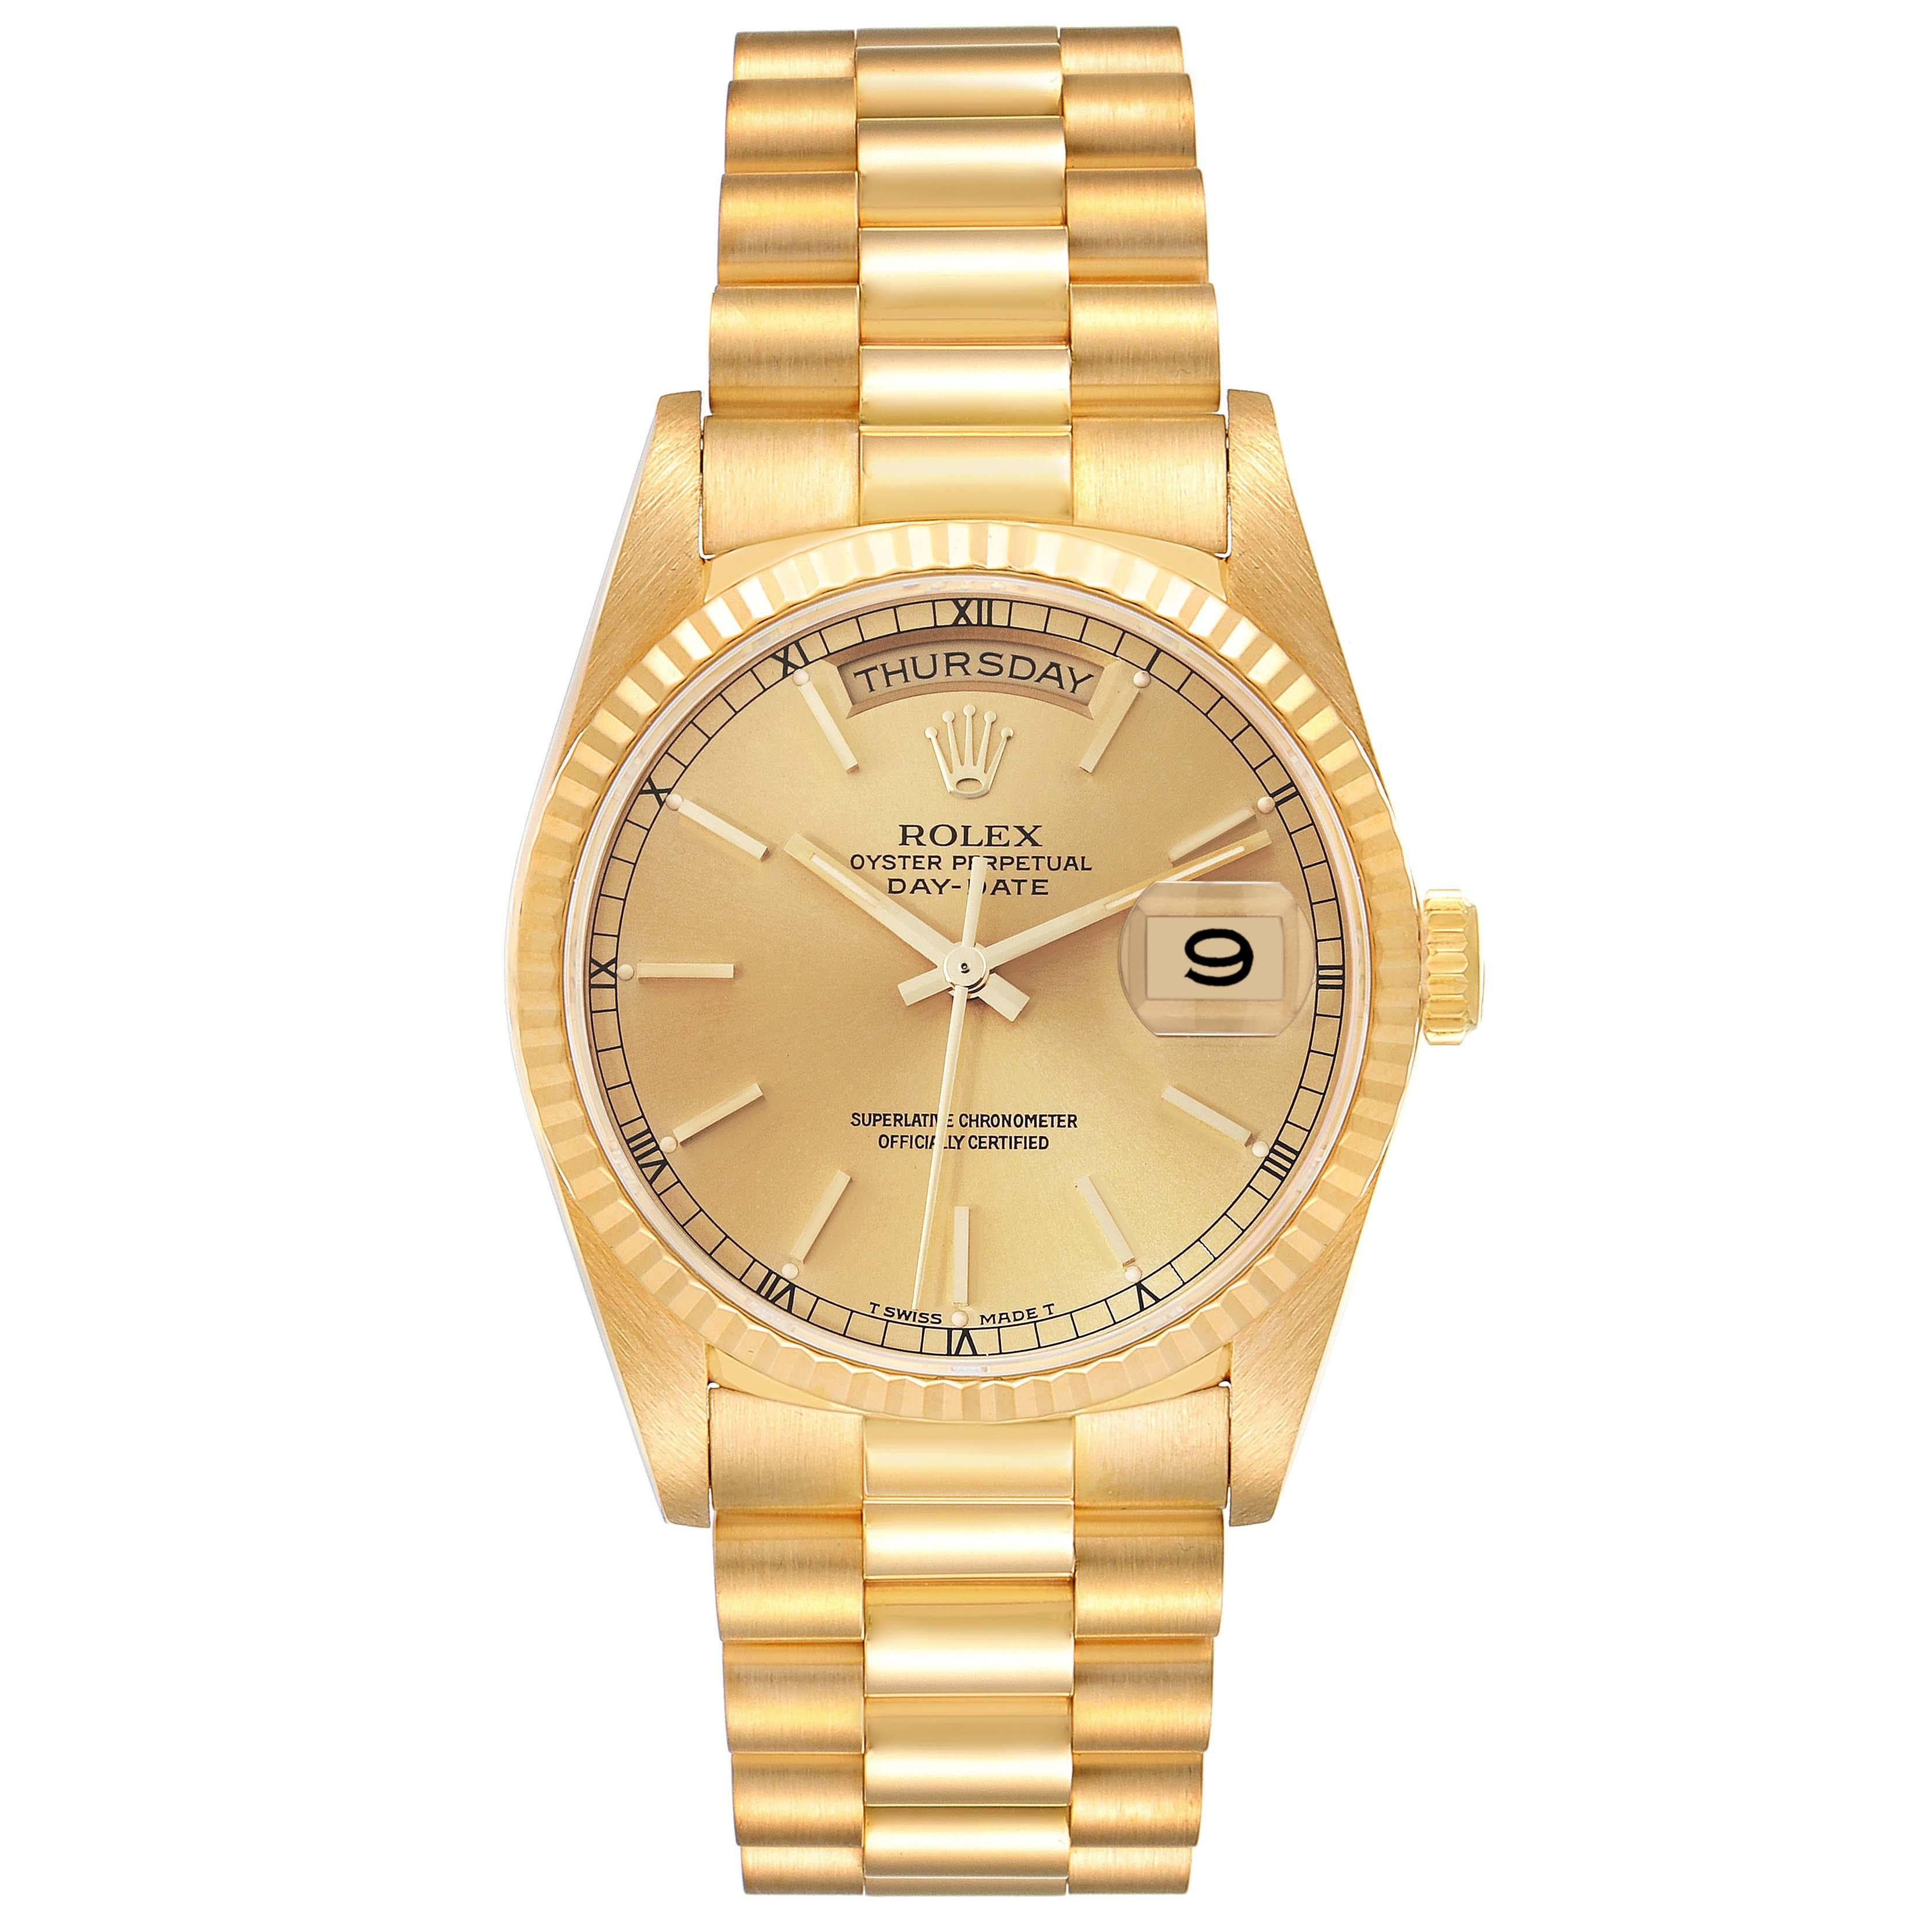 Rolex President Day-Date Yellow Gold Champagne Dial Mens Watch 18238 Box Papers. Officially certified chronometer automatic self-winding movement. 18k yellow gold oyster case 36.0 mm in diameter.  Rolex logo on the crown. 18K yellow gold fluted